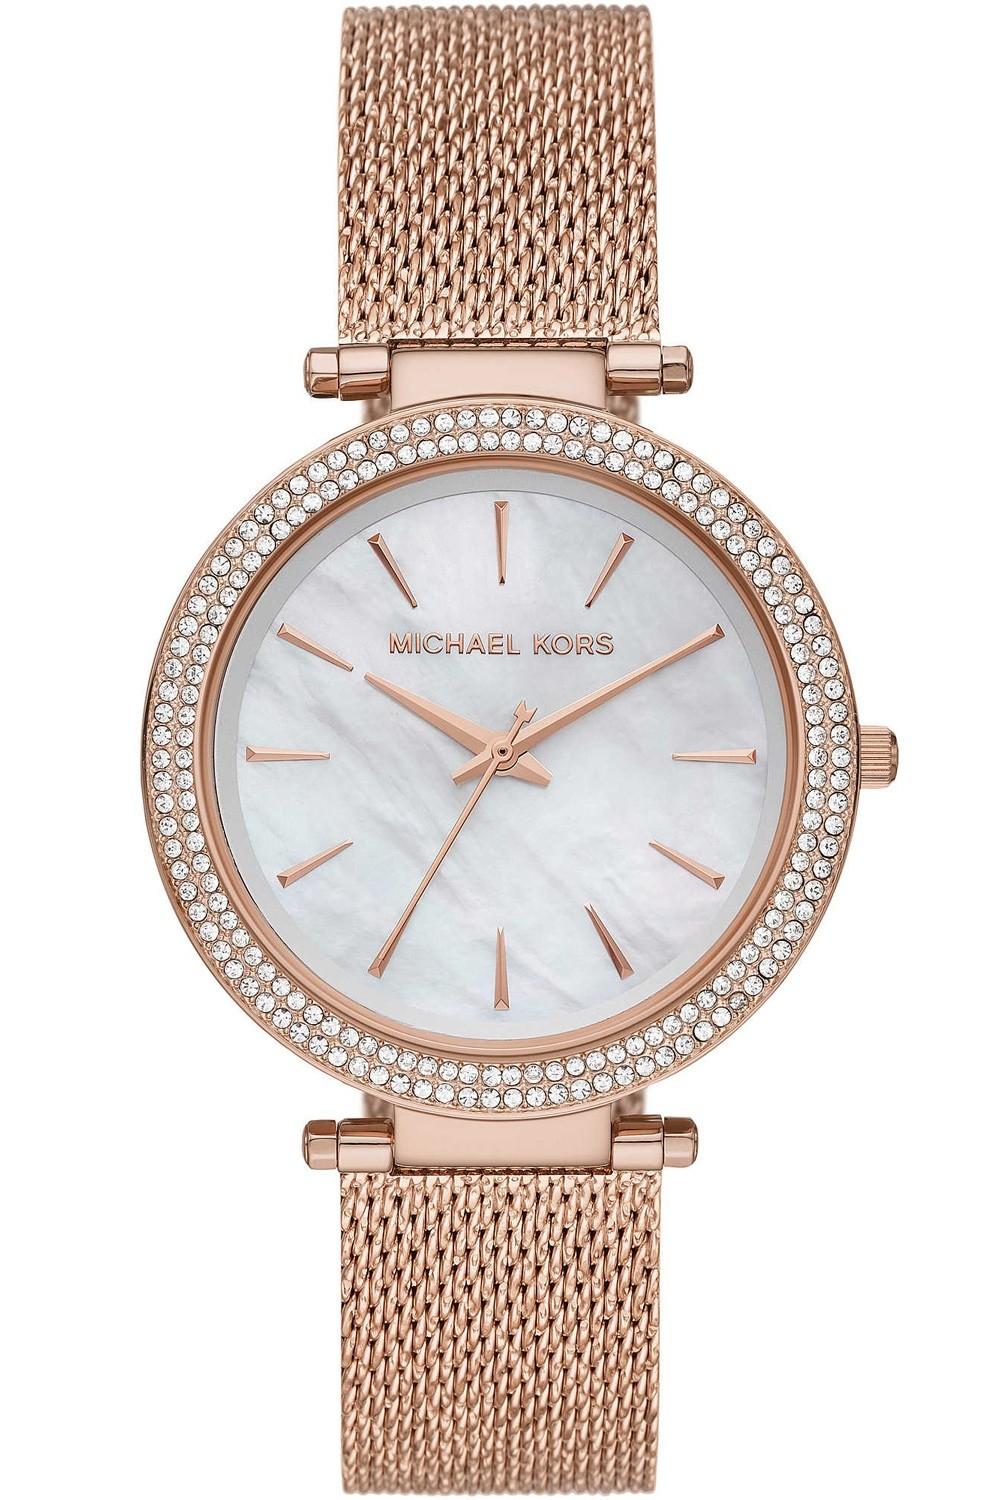 MICHAEL KORS Darci Crystals - MK4519, Rose Gold case with Stainless Steel Bracelet